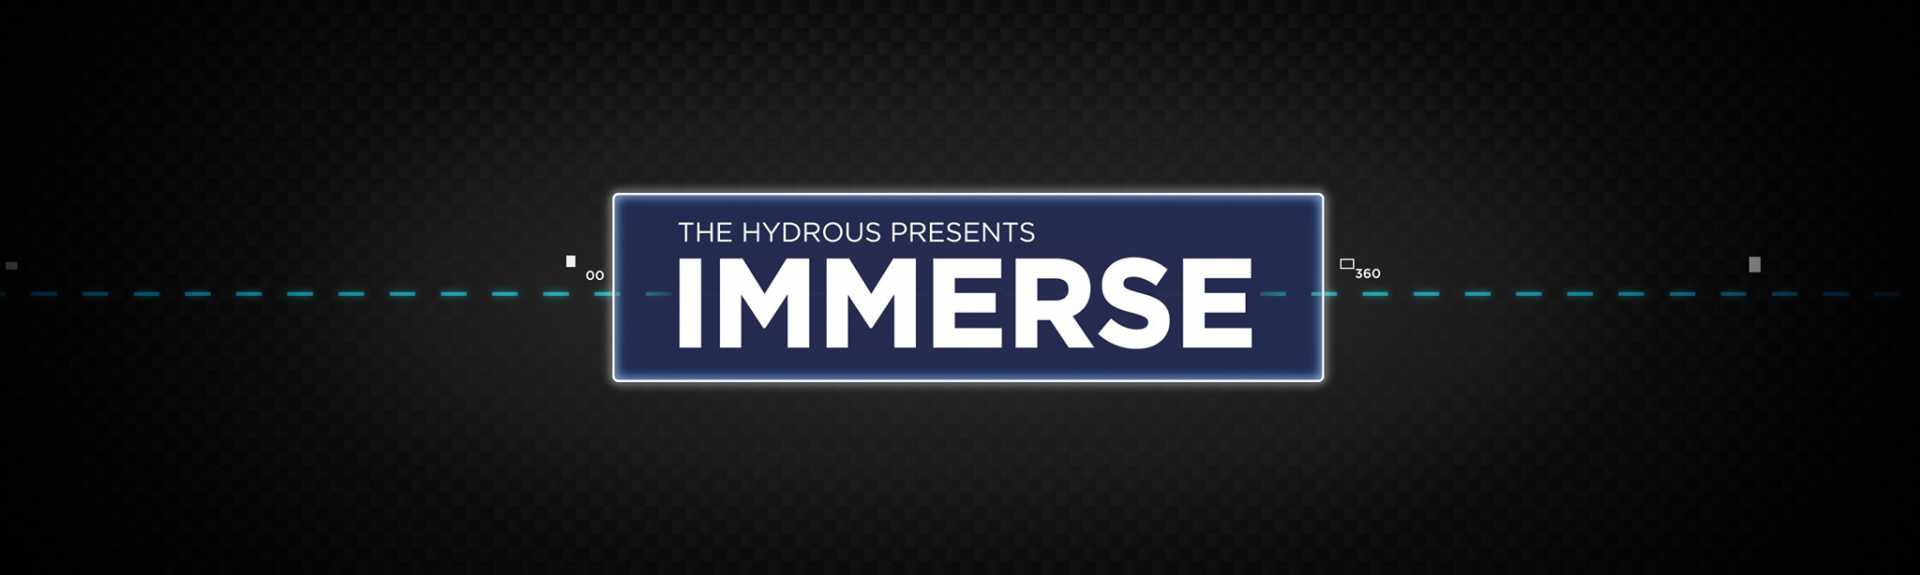 The Hydrous presents: IMMERSE